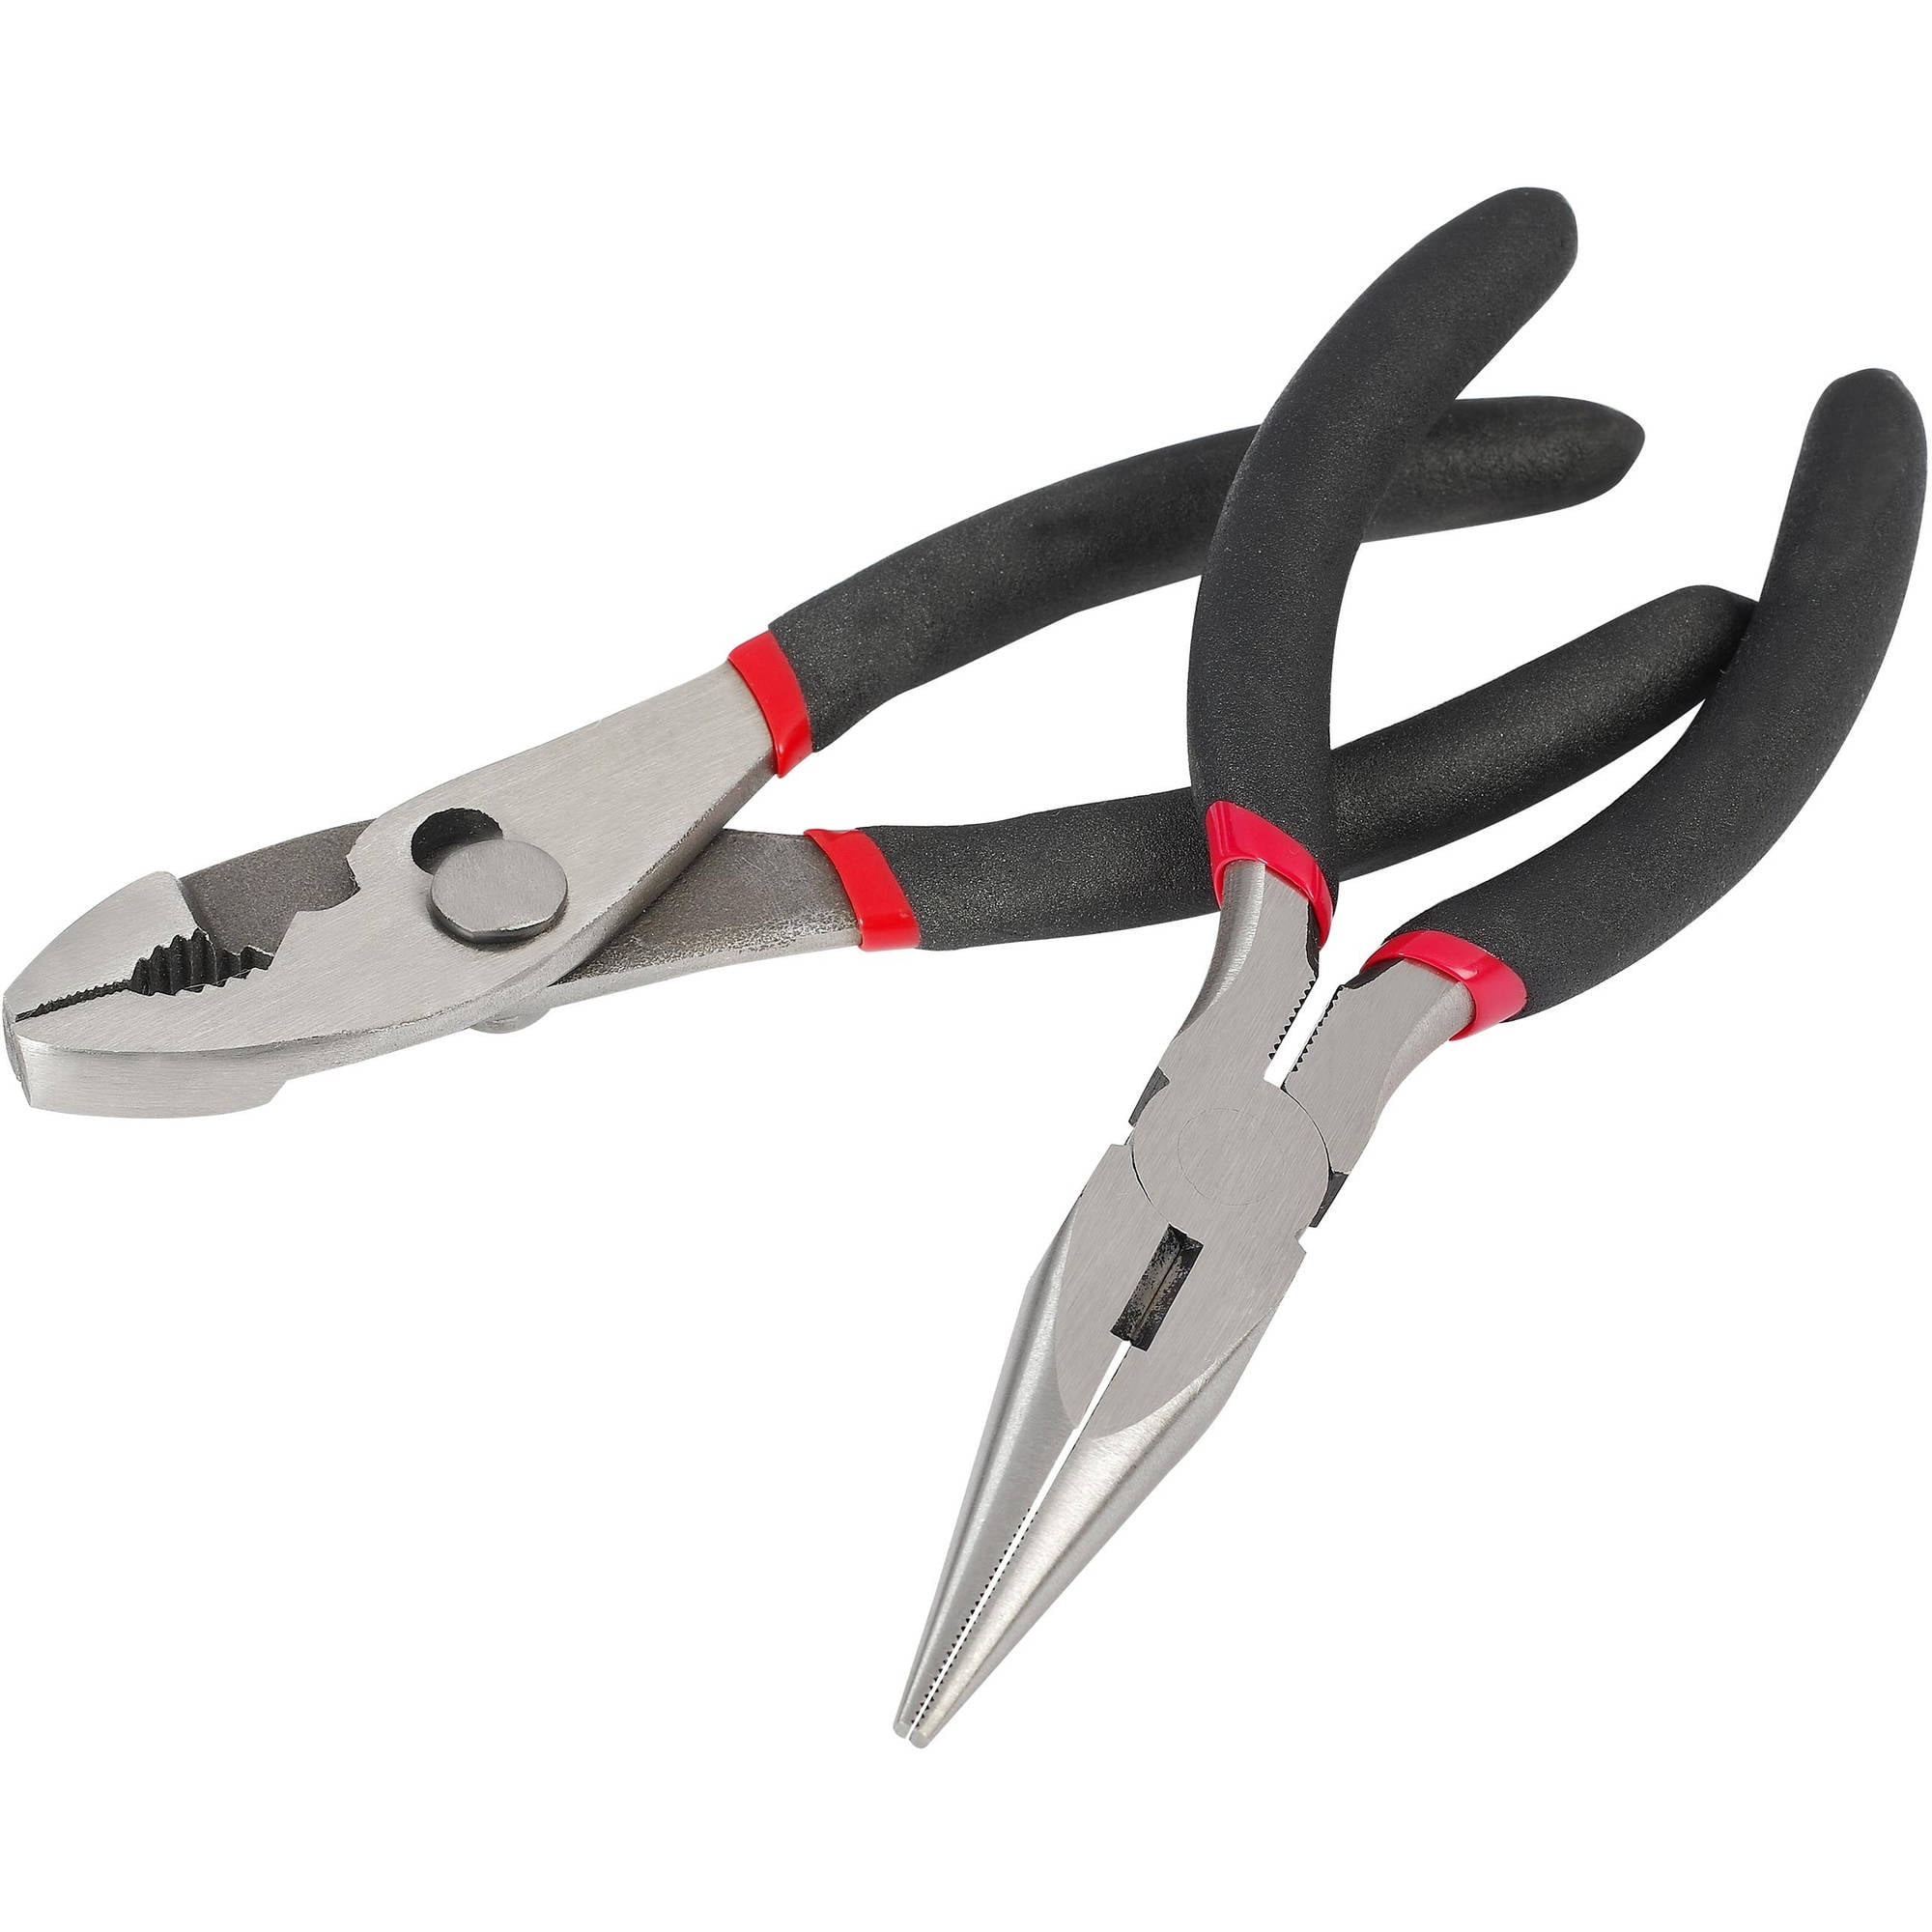  Mini Needle Nose Pliers 5-5 Pack KAIHAOWIN Small Long Nose  Pliers with Wire Cutters, Spring Loaded Thin Needle Nose Pliers, Precision  Pliers Set for Crafts/Jewelry Making/Tiny Project : Everything Else